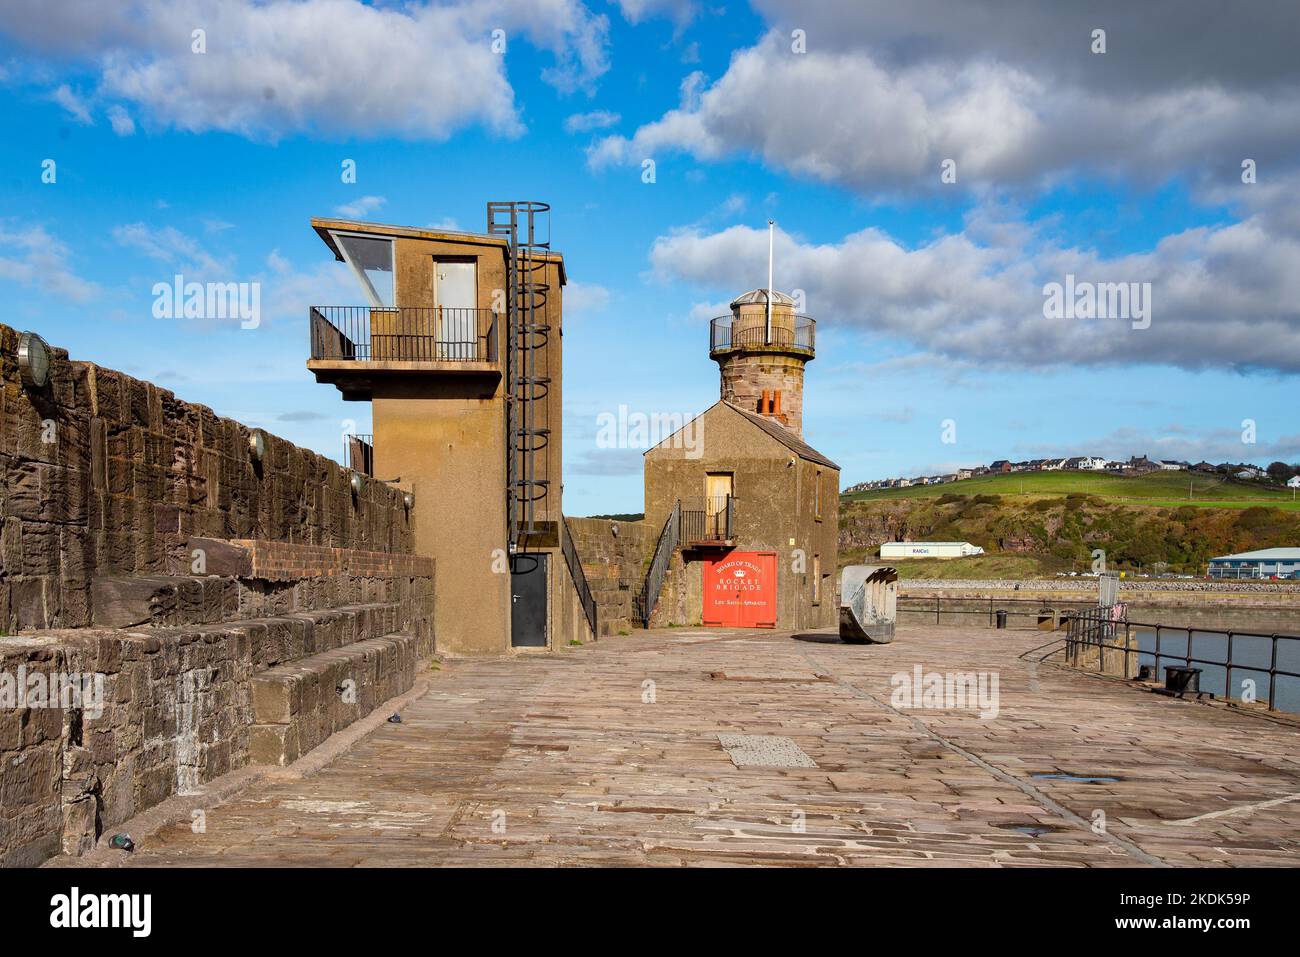 The Coastguard Lookout Tower and the Whitehaven Volunteer Life Saving Brigade (The Rocket Brigade) building,Whitehaven, Cumbria, UK Stock Photo